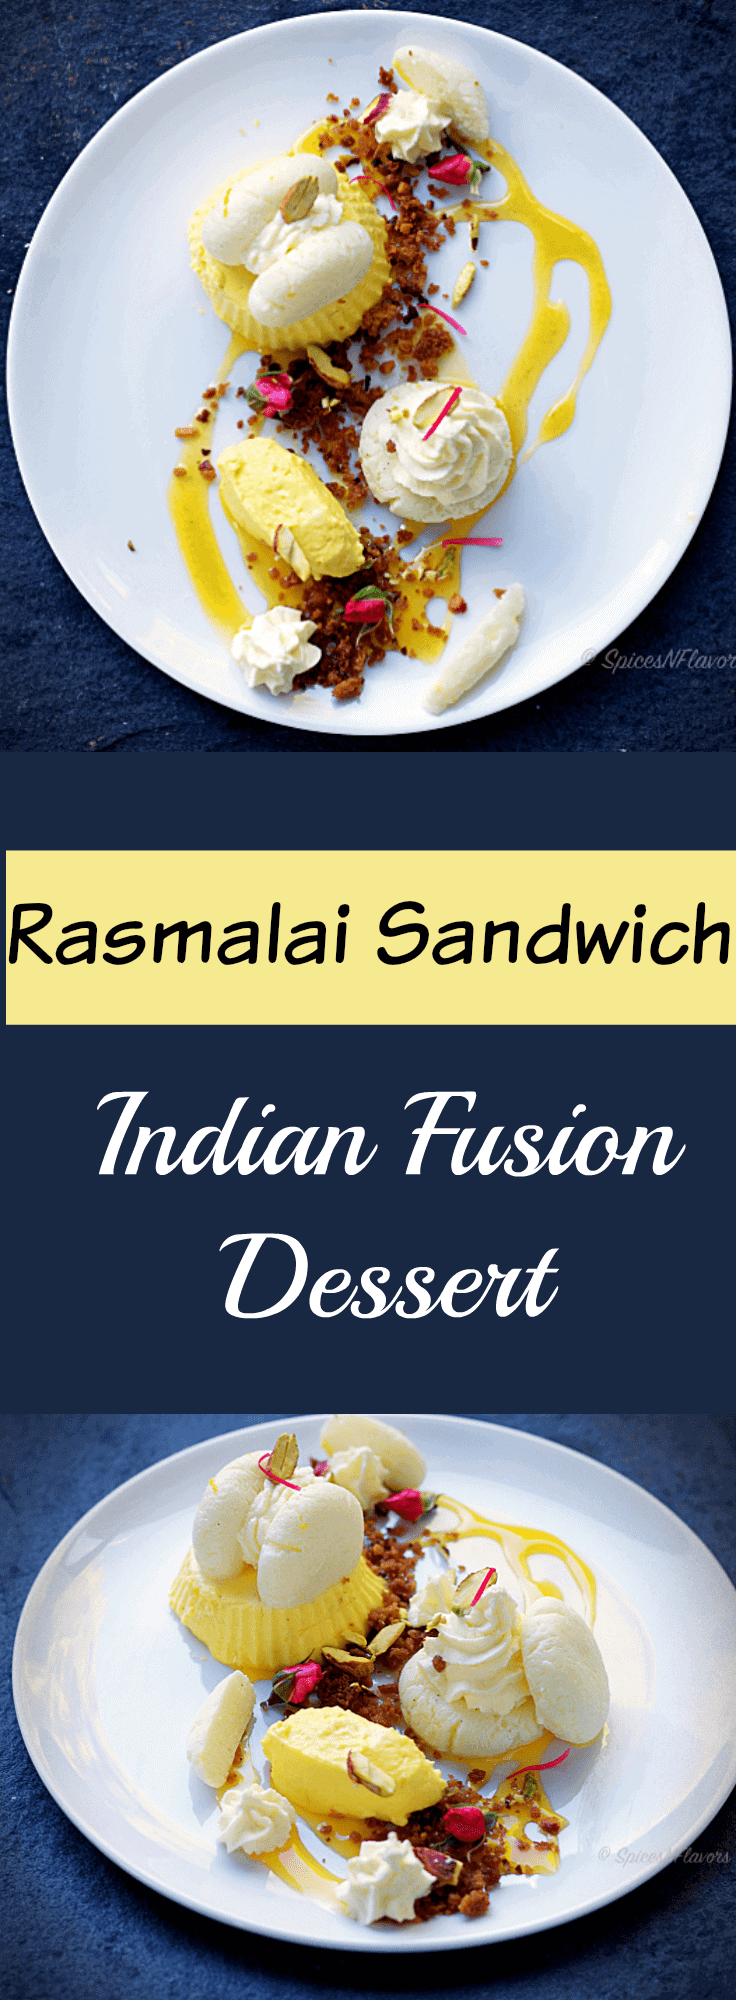 Malai Sandwich with Kesar Mousse Cardamom Crumble and Passionfruit Coulis indian fusion dessert rasmalai